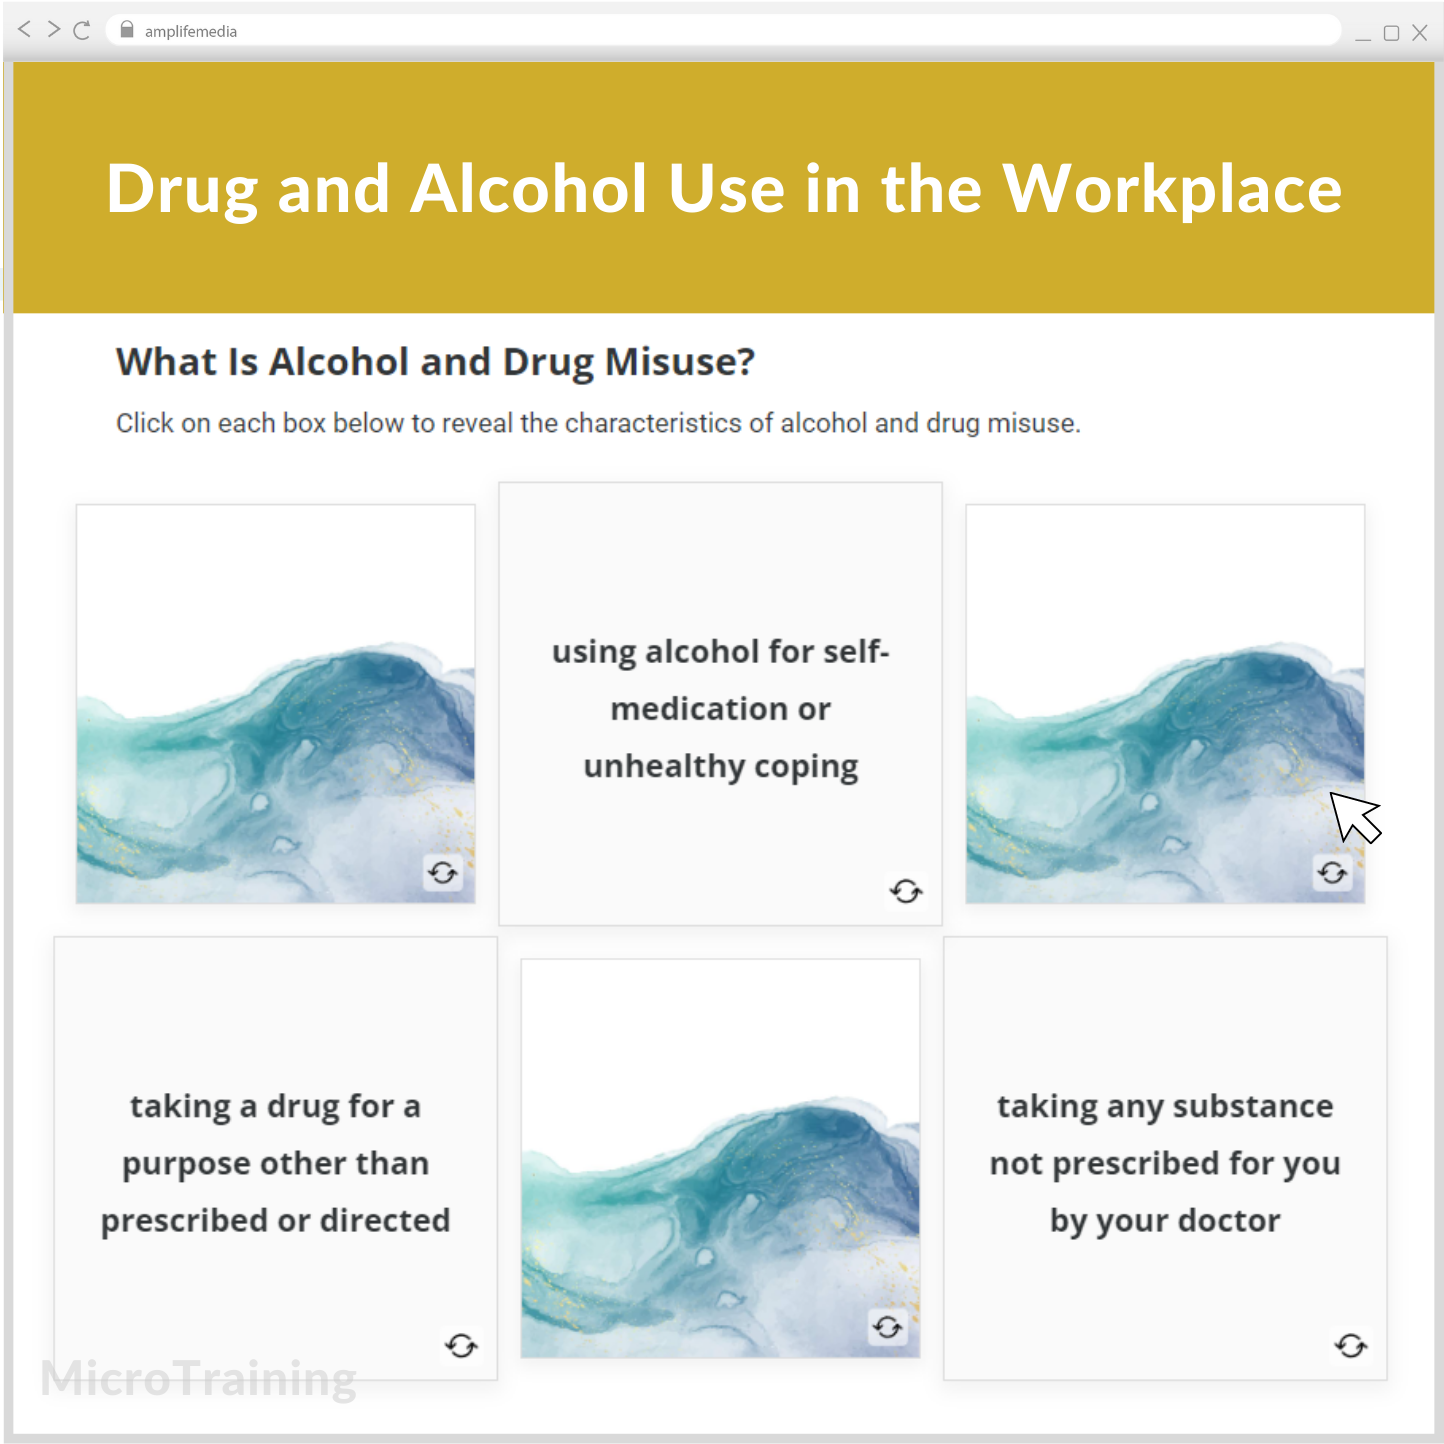 Subscription to Wellbeing Media: Drug and Alcohol Use in the Workplace MT 123